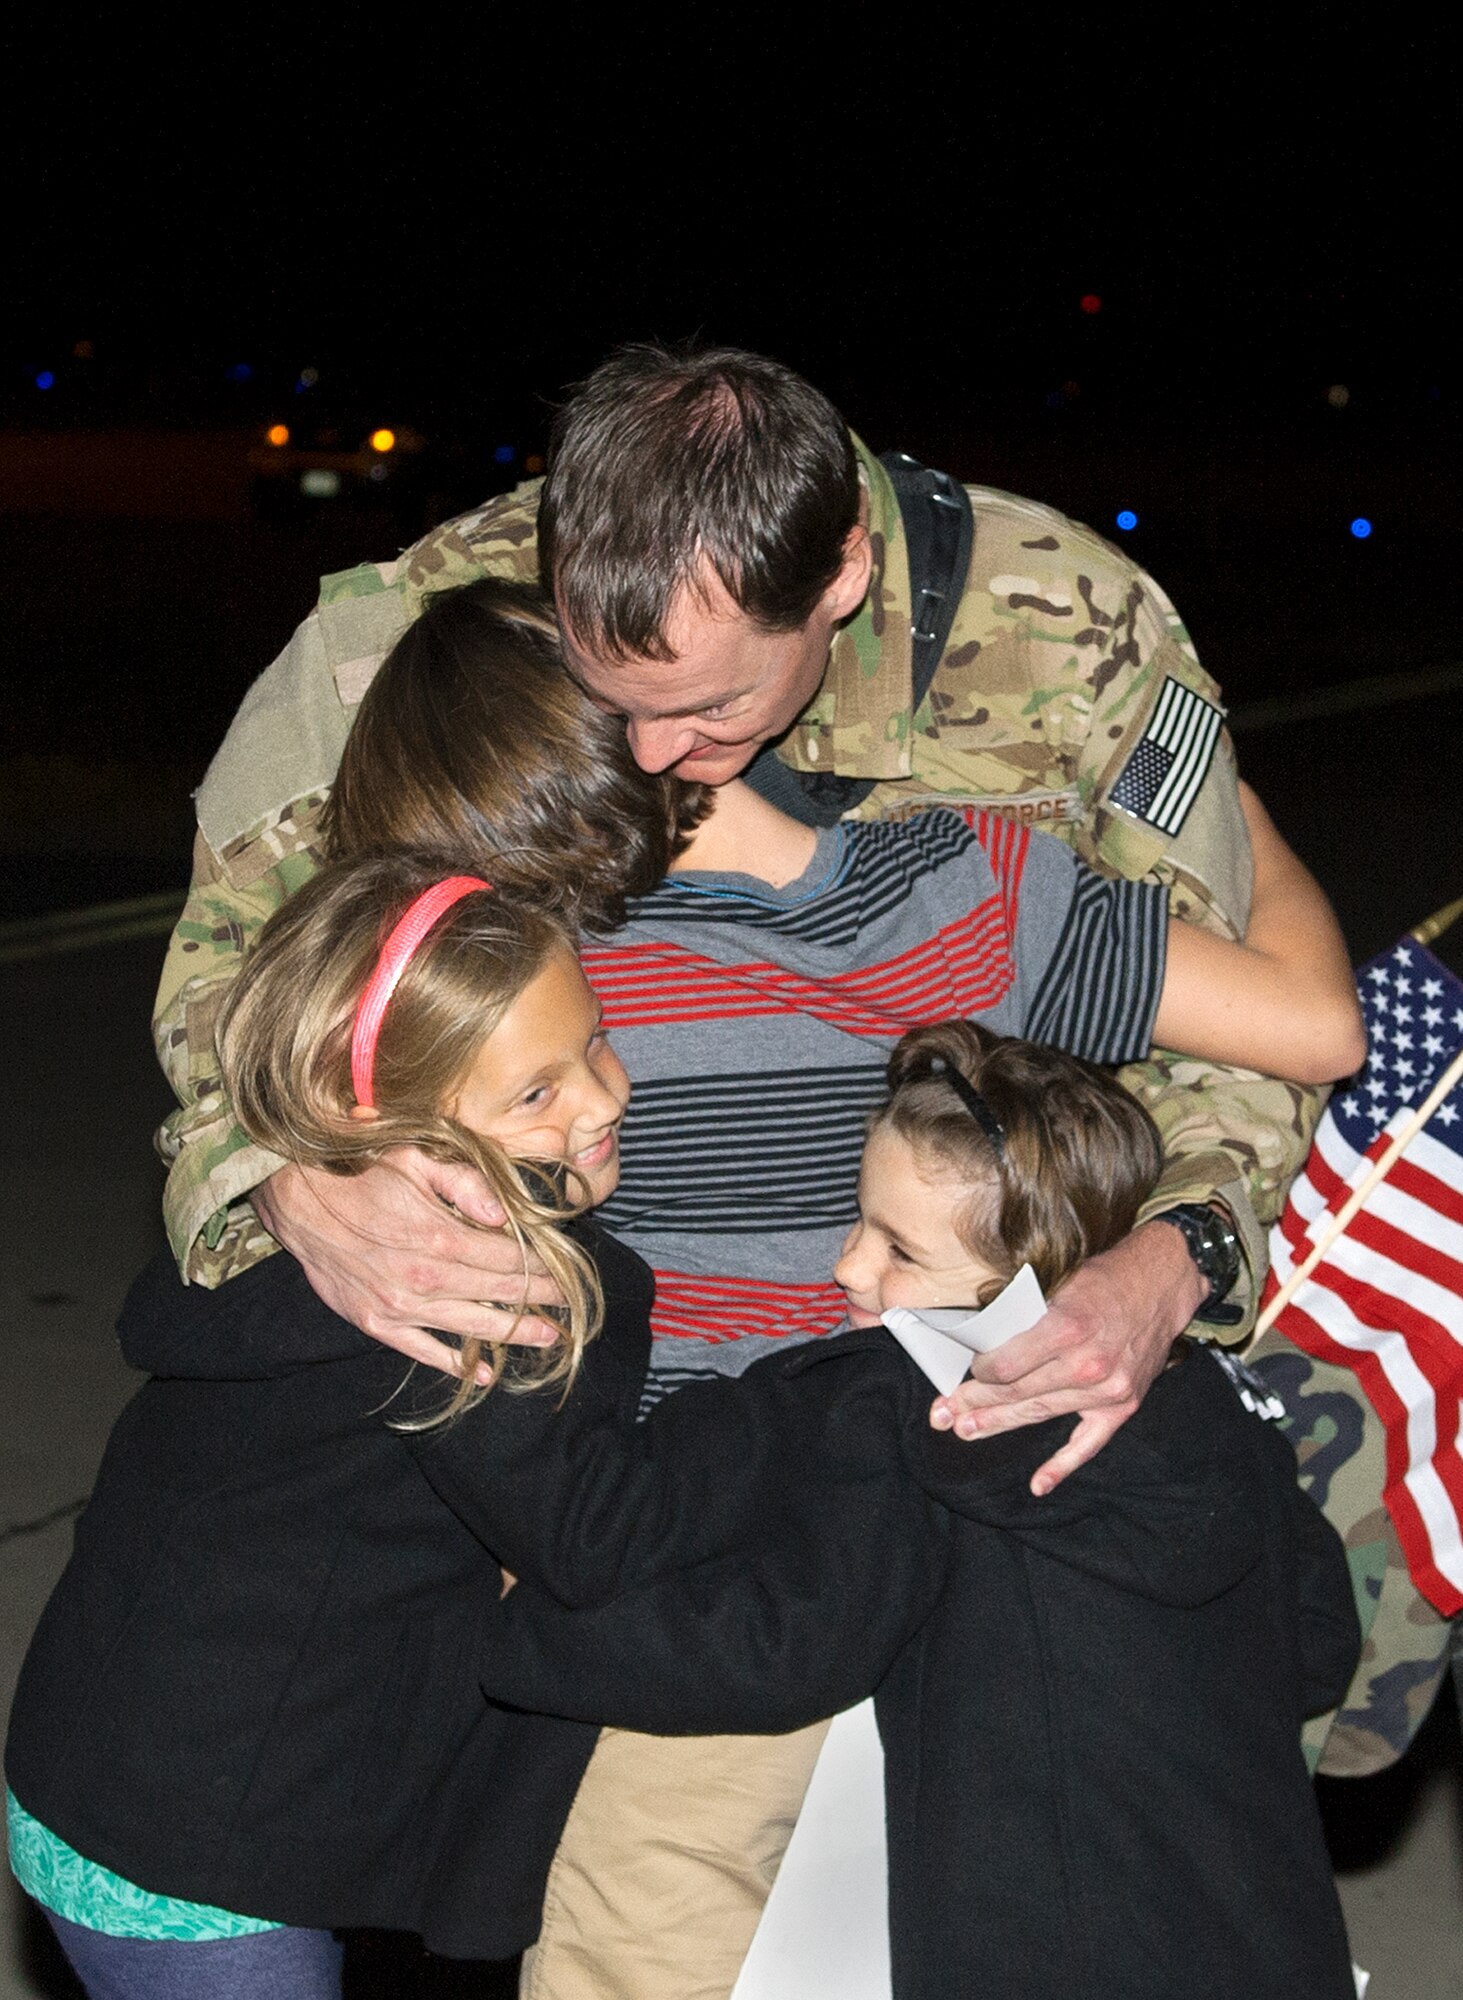 Maj. Timothy Romin, MC-130H Combat Talon II aircraft navigator for 15th Special Operations Squadron, is welcomed home by his family during Operation Homecoming on Hurlburt Field, Fla., Nov. 7, 2014. Operation Homecoming allows family and friends to welcome home their loved ones who are returning from deployment. (U.S. Air Force photo/Senior Airman Kentavist P. Brackin)